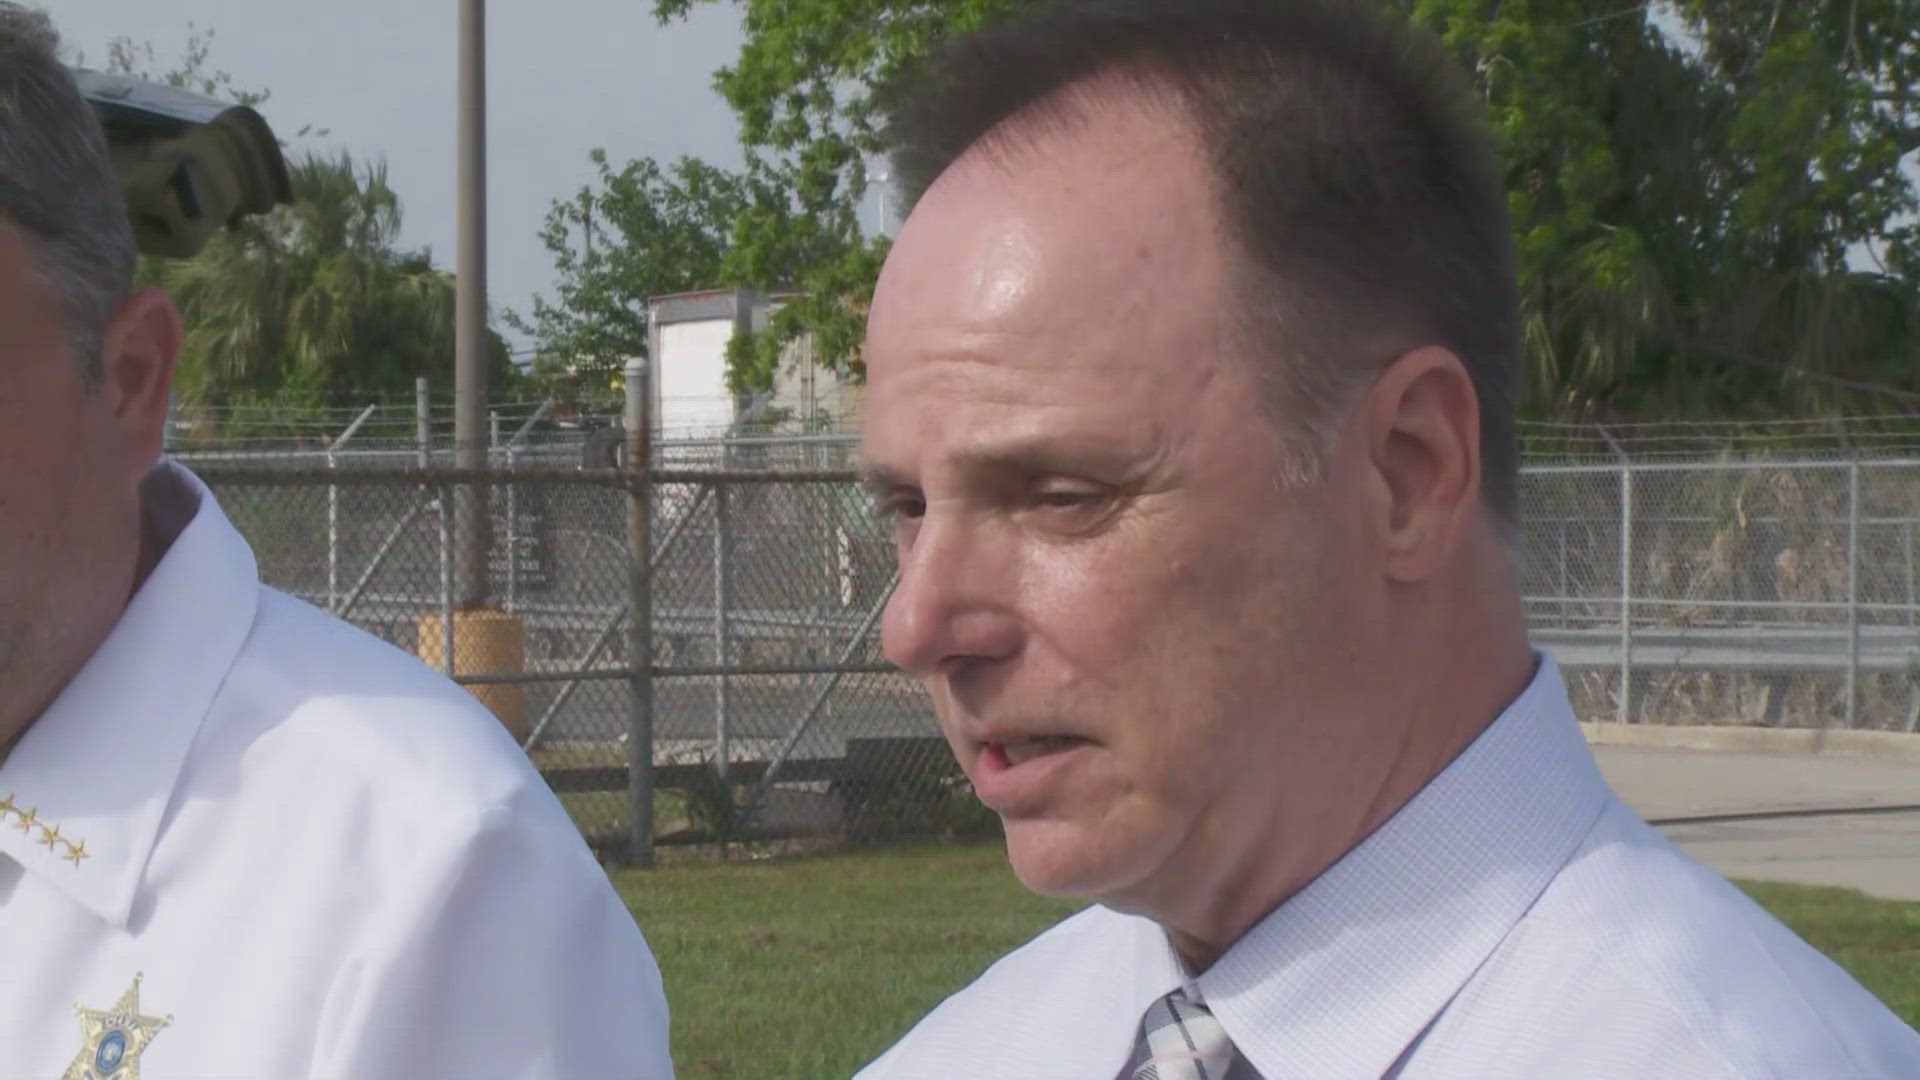 Jefferson Parish Joe Lopinbto and Kenner Police Department Captain Michael Cunningham give an update on the standoff that ended with the suspect dead.